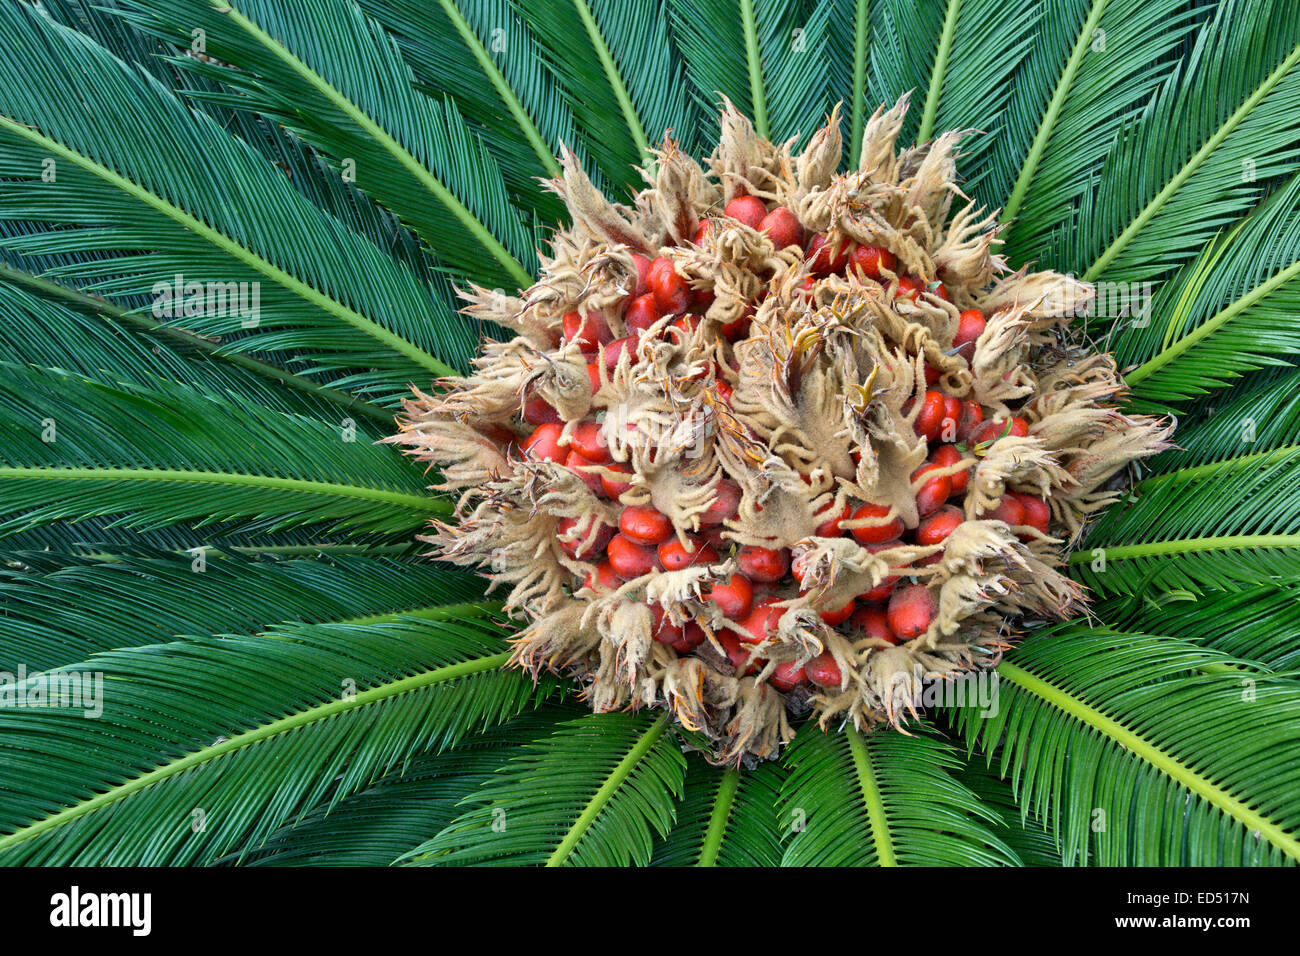 Sago Palm flowering, producing a felt mass in the center of the leaf mass. Stock Photo